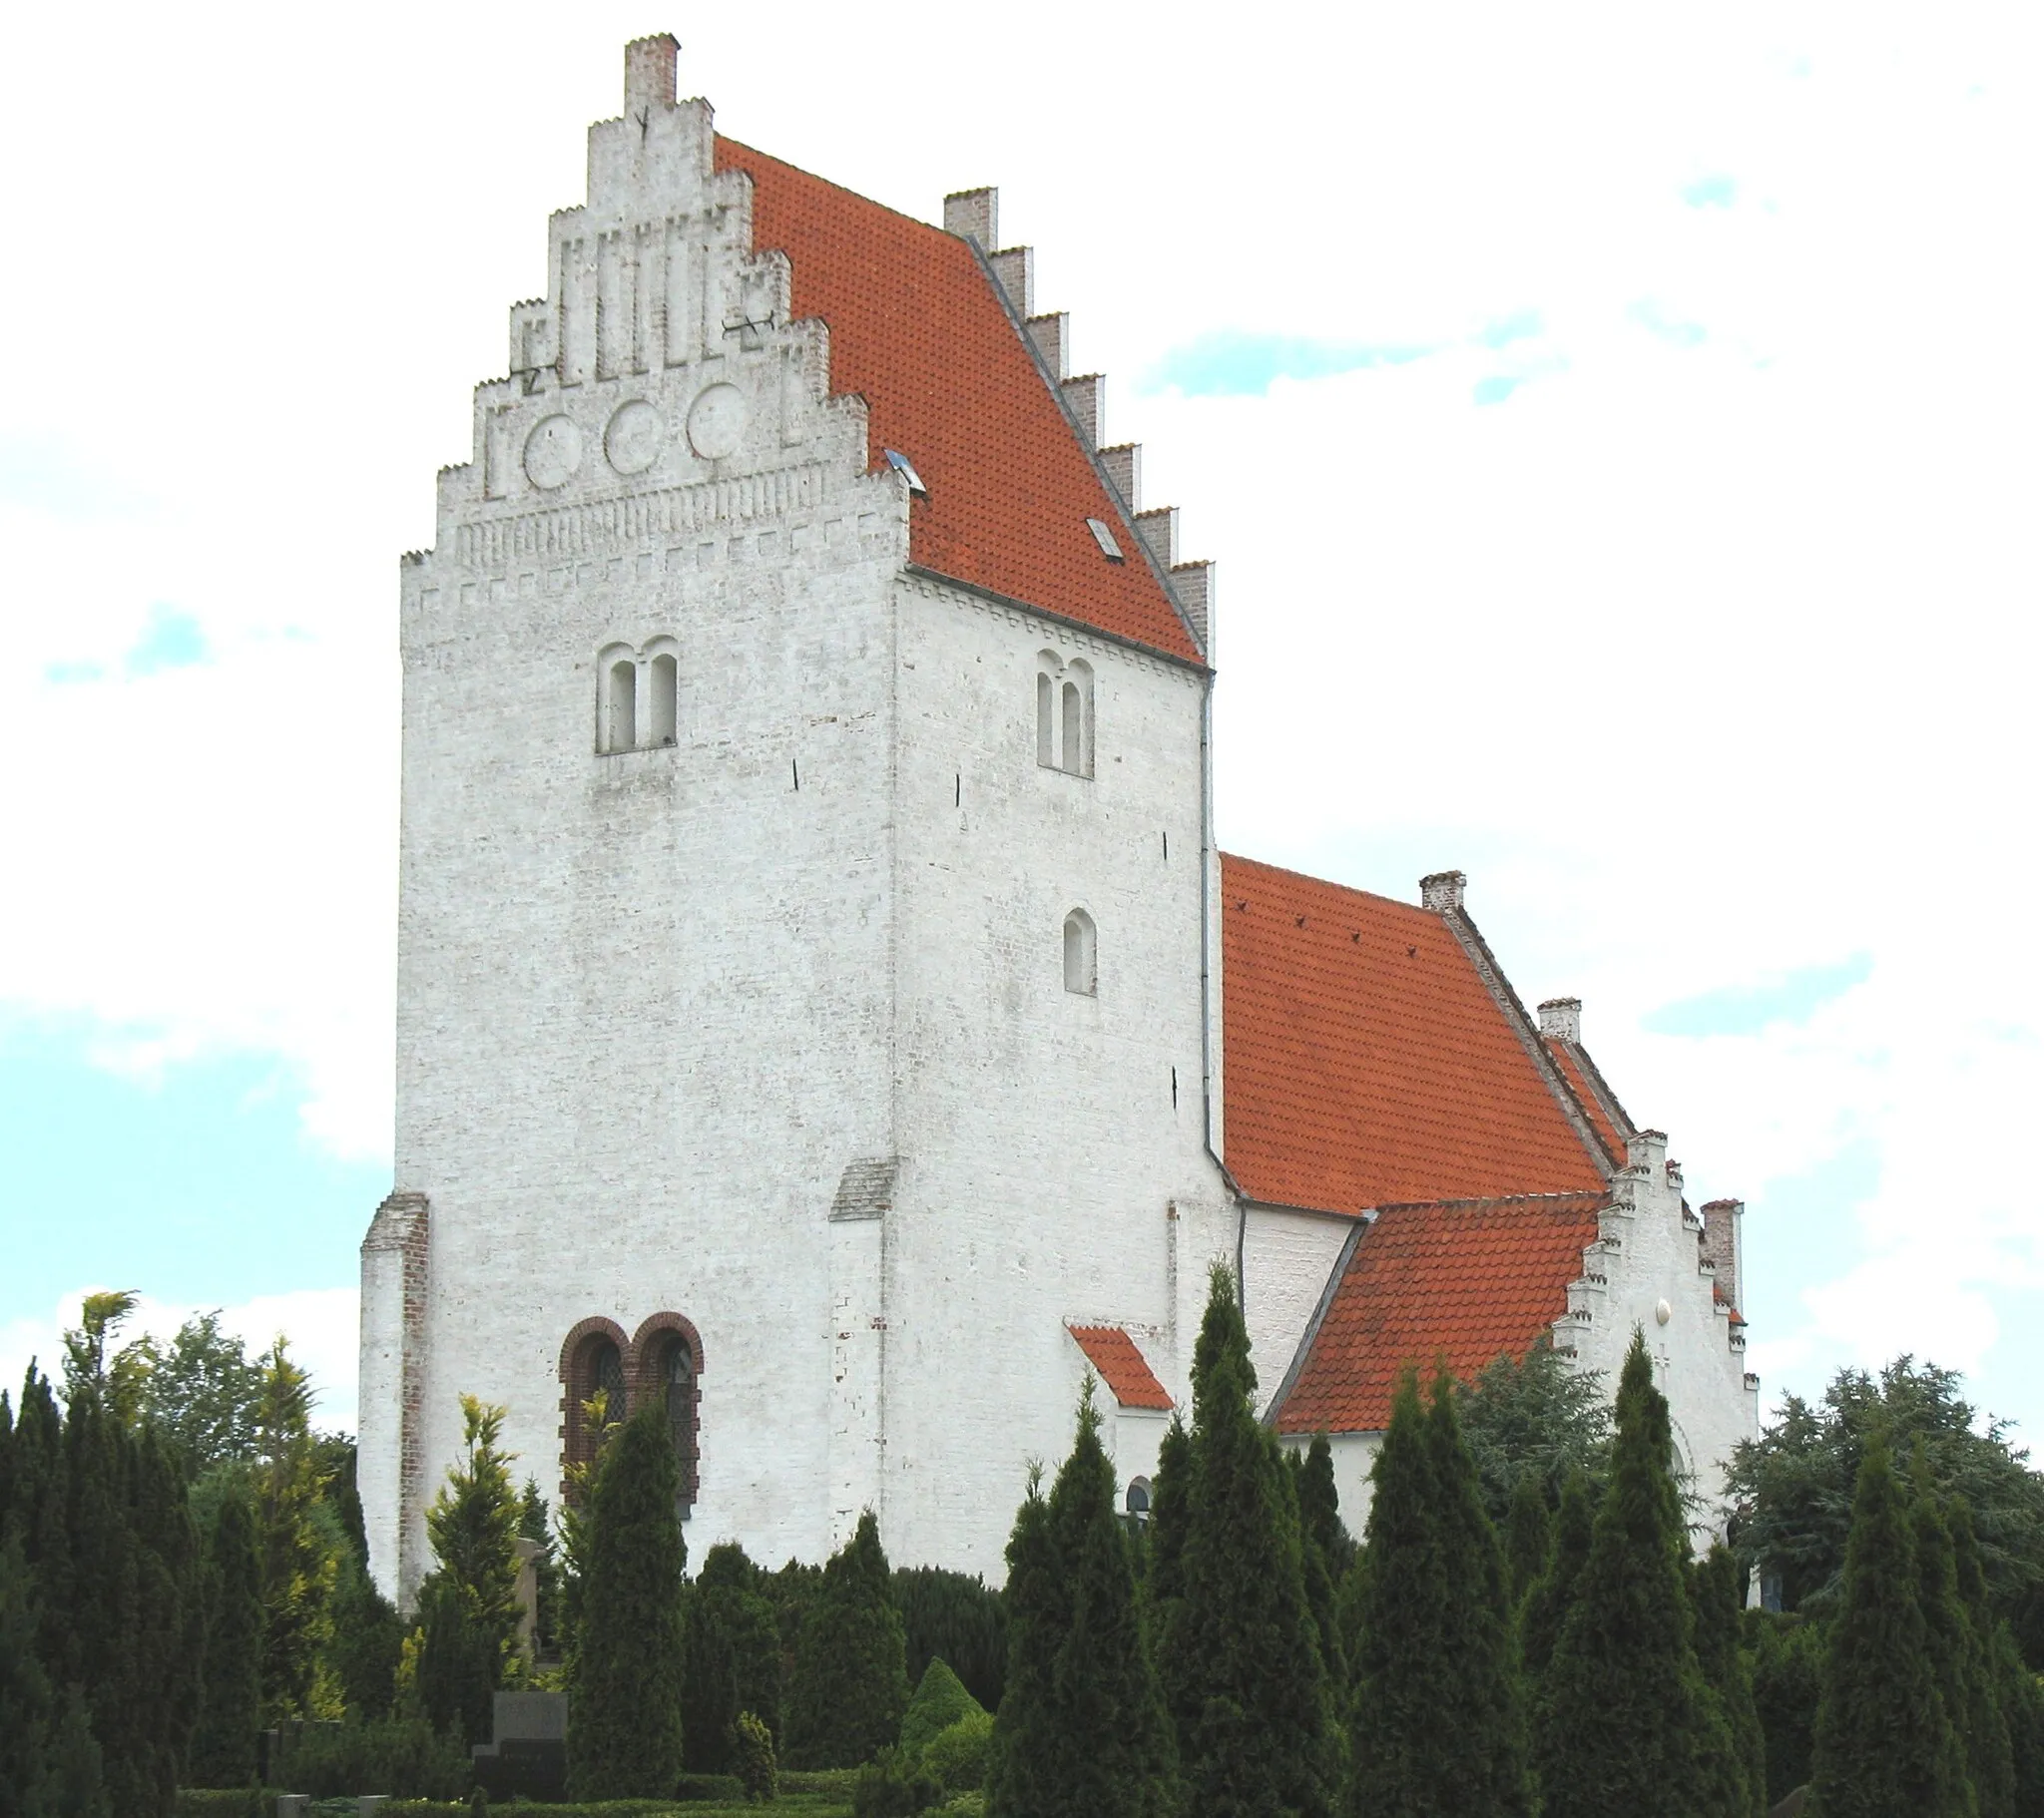 Photo showing: The church "Horbelev Kirke" located on the Danish island Falster.